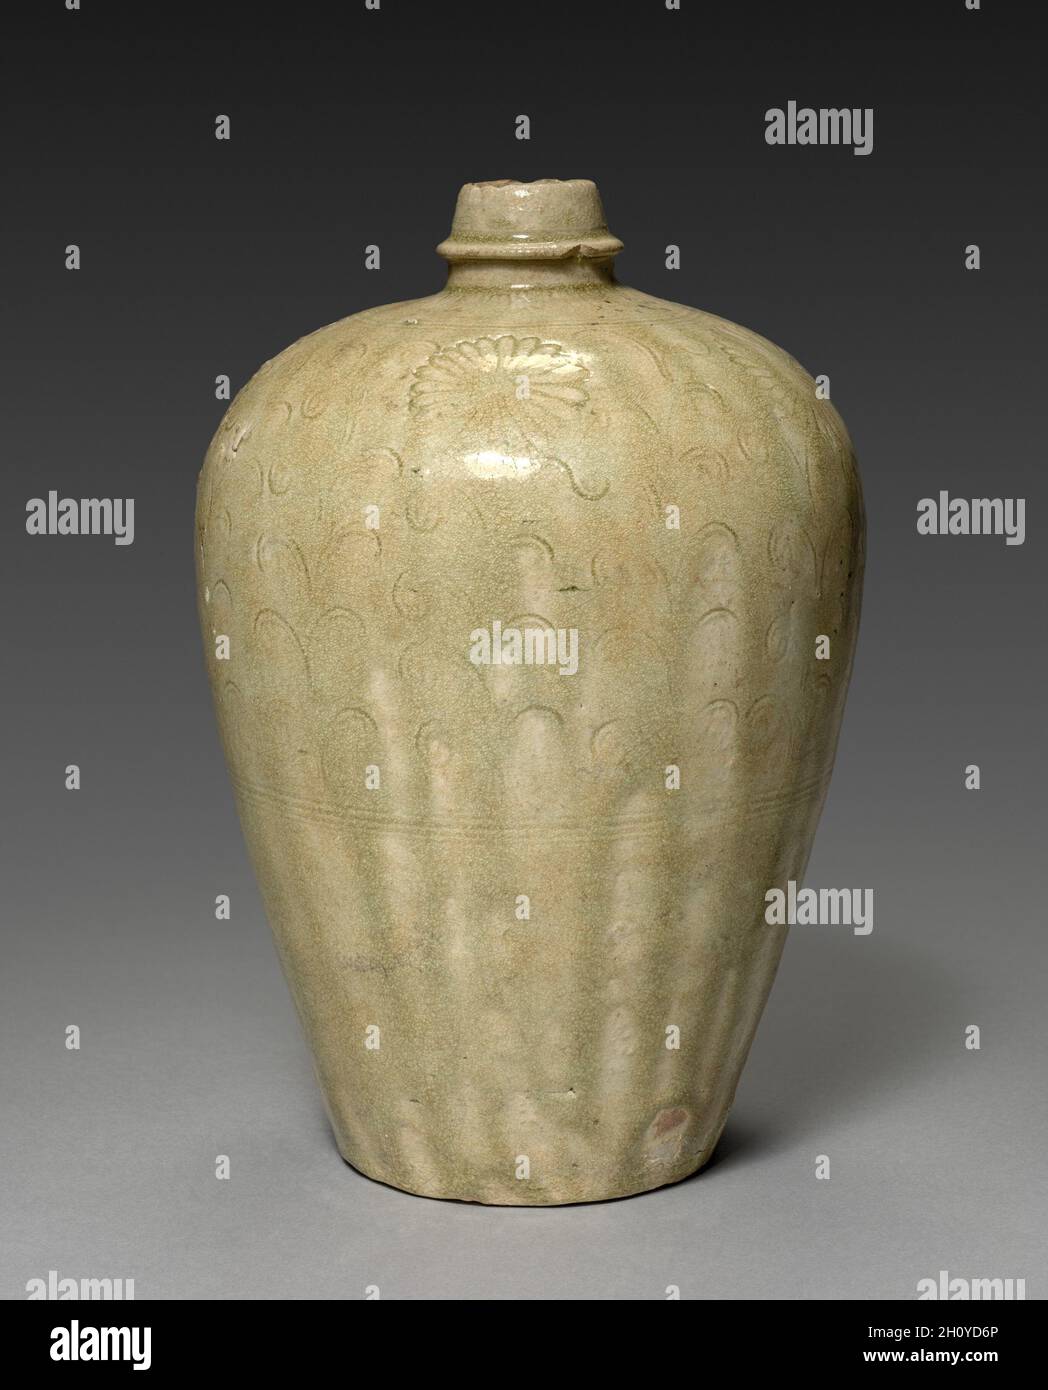 Wine Flask, c. 1300. Japan, Kamakura period (1185-1333). Stoneware with ash glaze and underglaze stamped and incised decoration (Seto ware); diameter: 17 cm (6 11/16 in.); overall: 25.3 cm (9 15/16 in.).  This wine flask (heishi) was produced in Seto, in present-day Aichi prefecture near the city of Nagoya. Seto ware was made in imitation of Chinese Song dynasty prototypes, and was unique among Japanese ceramics for being glazed at the initial time of its production in the late 1200s. Such wares were later prized for display in tea practice. Stock Photo